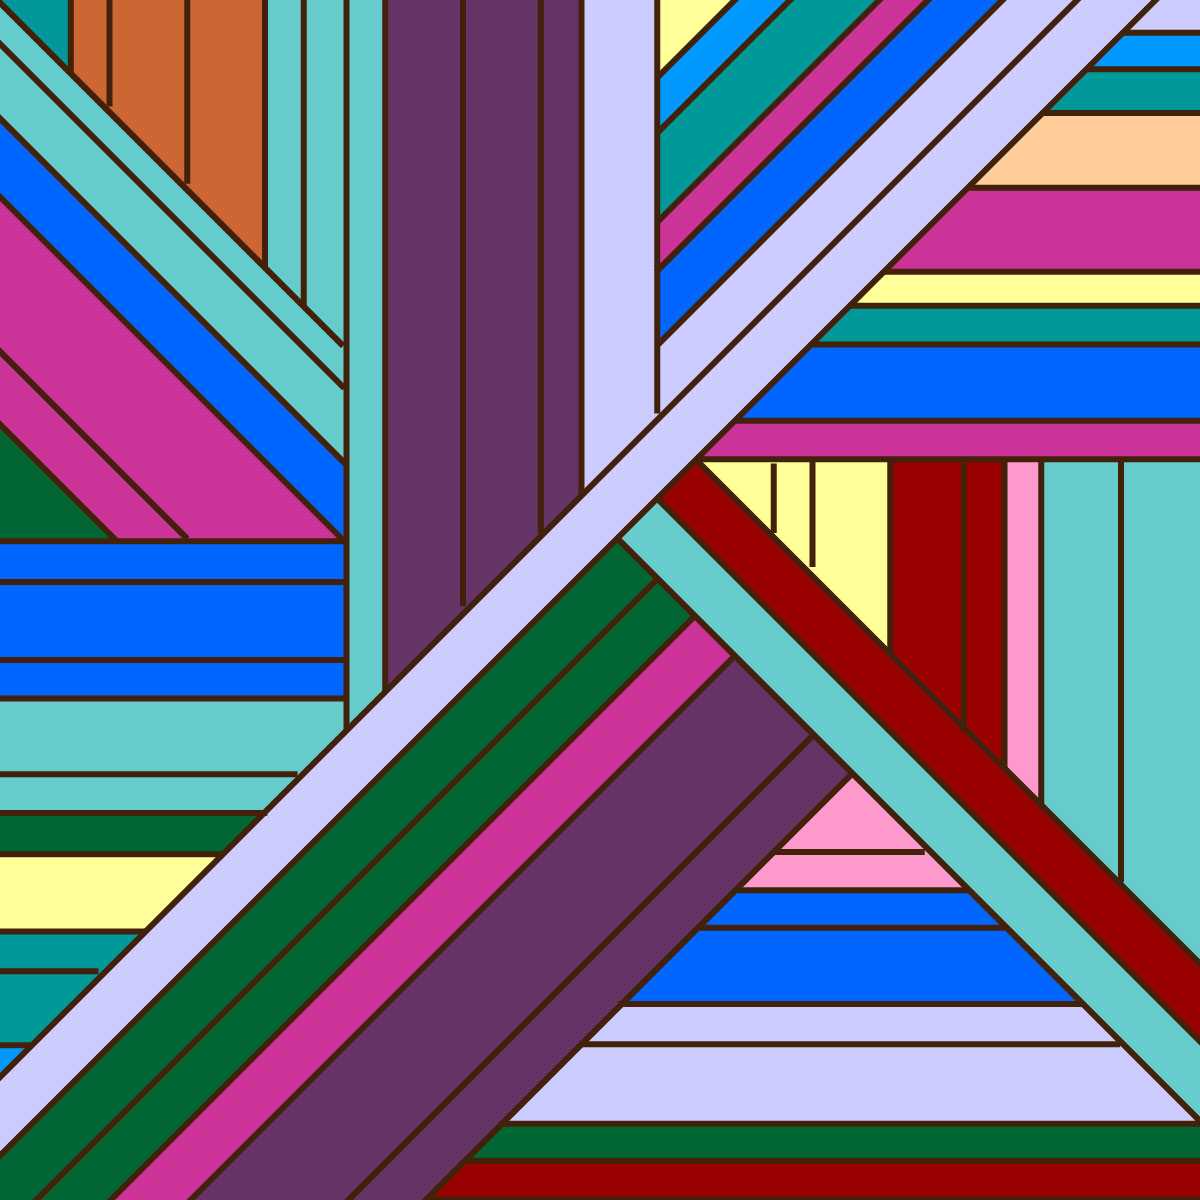 Parallel and Perpendicular Art – Denise Gaskins' Let's Play Math